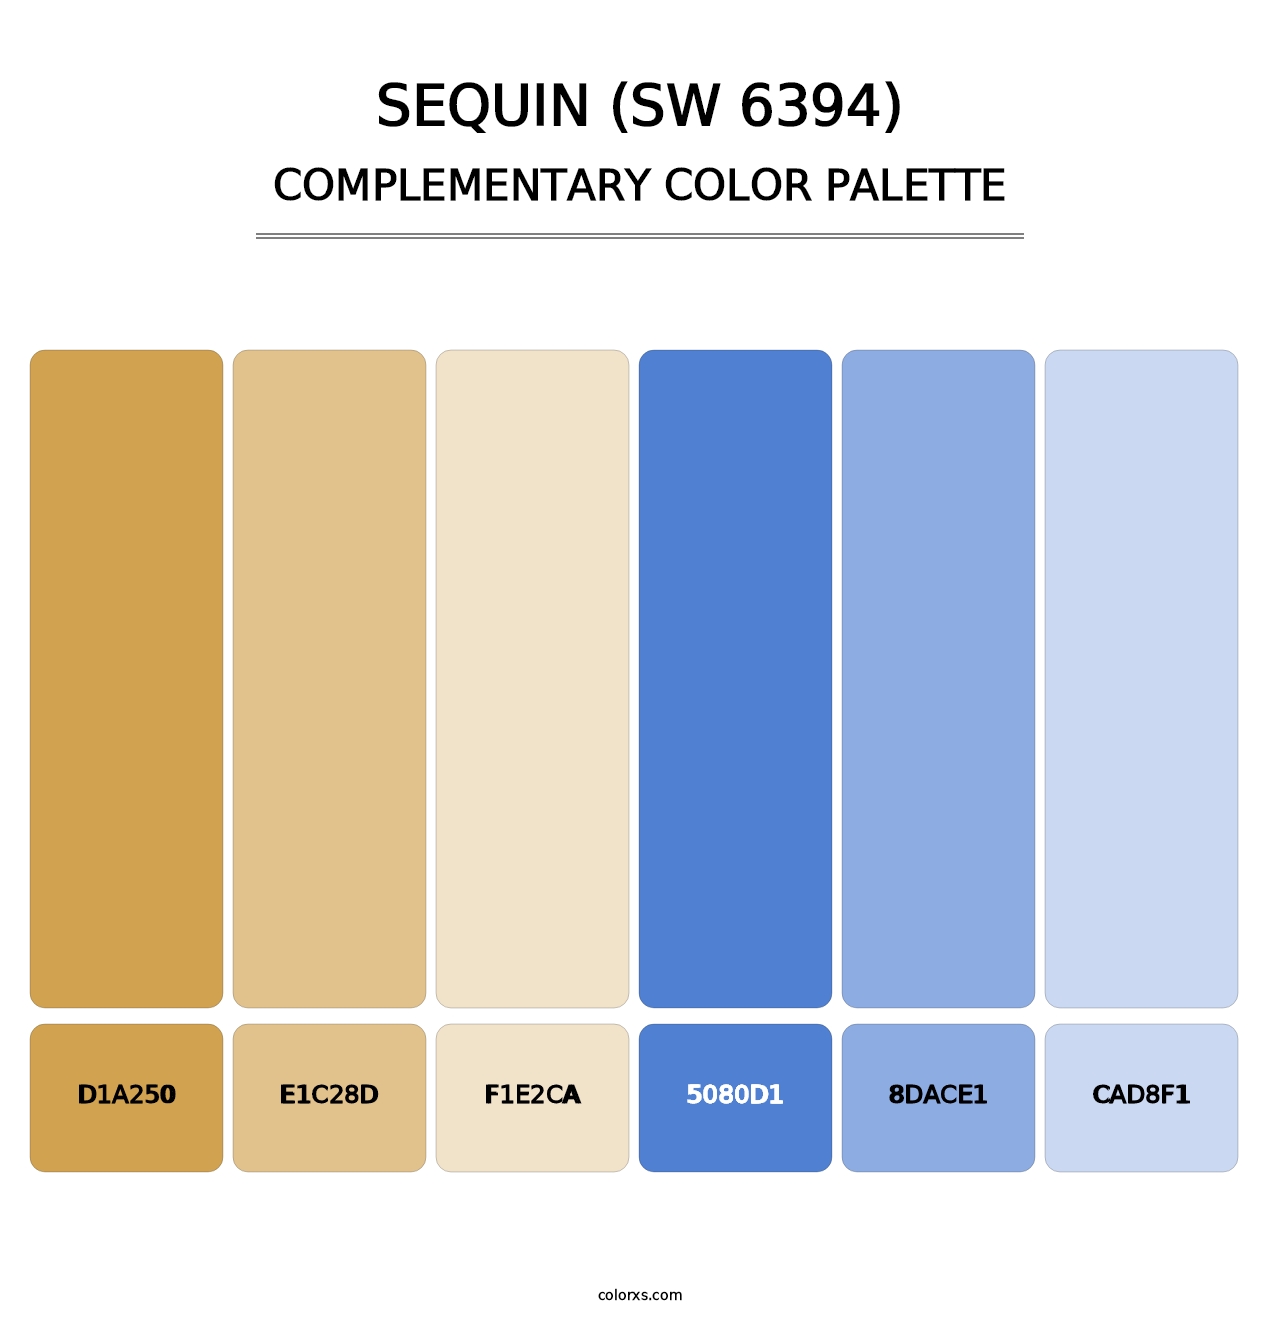 Sequin (SW 6394) - Complementary Color Palette